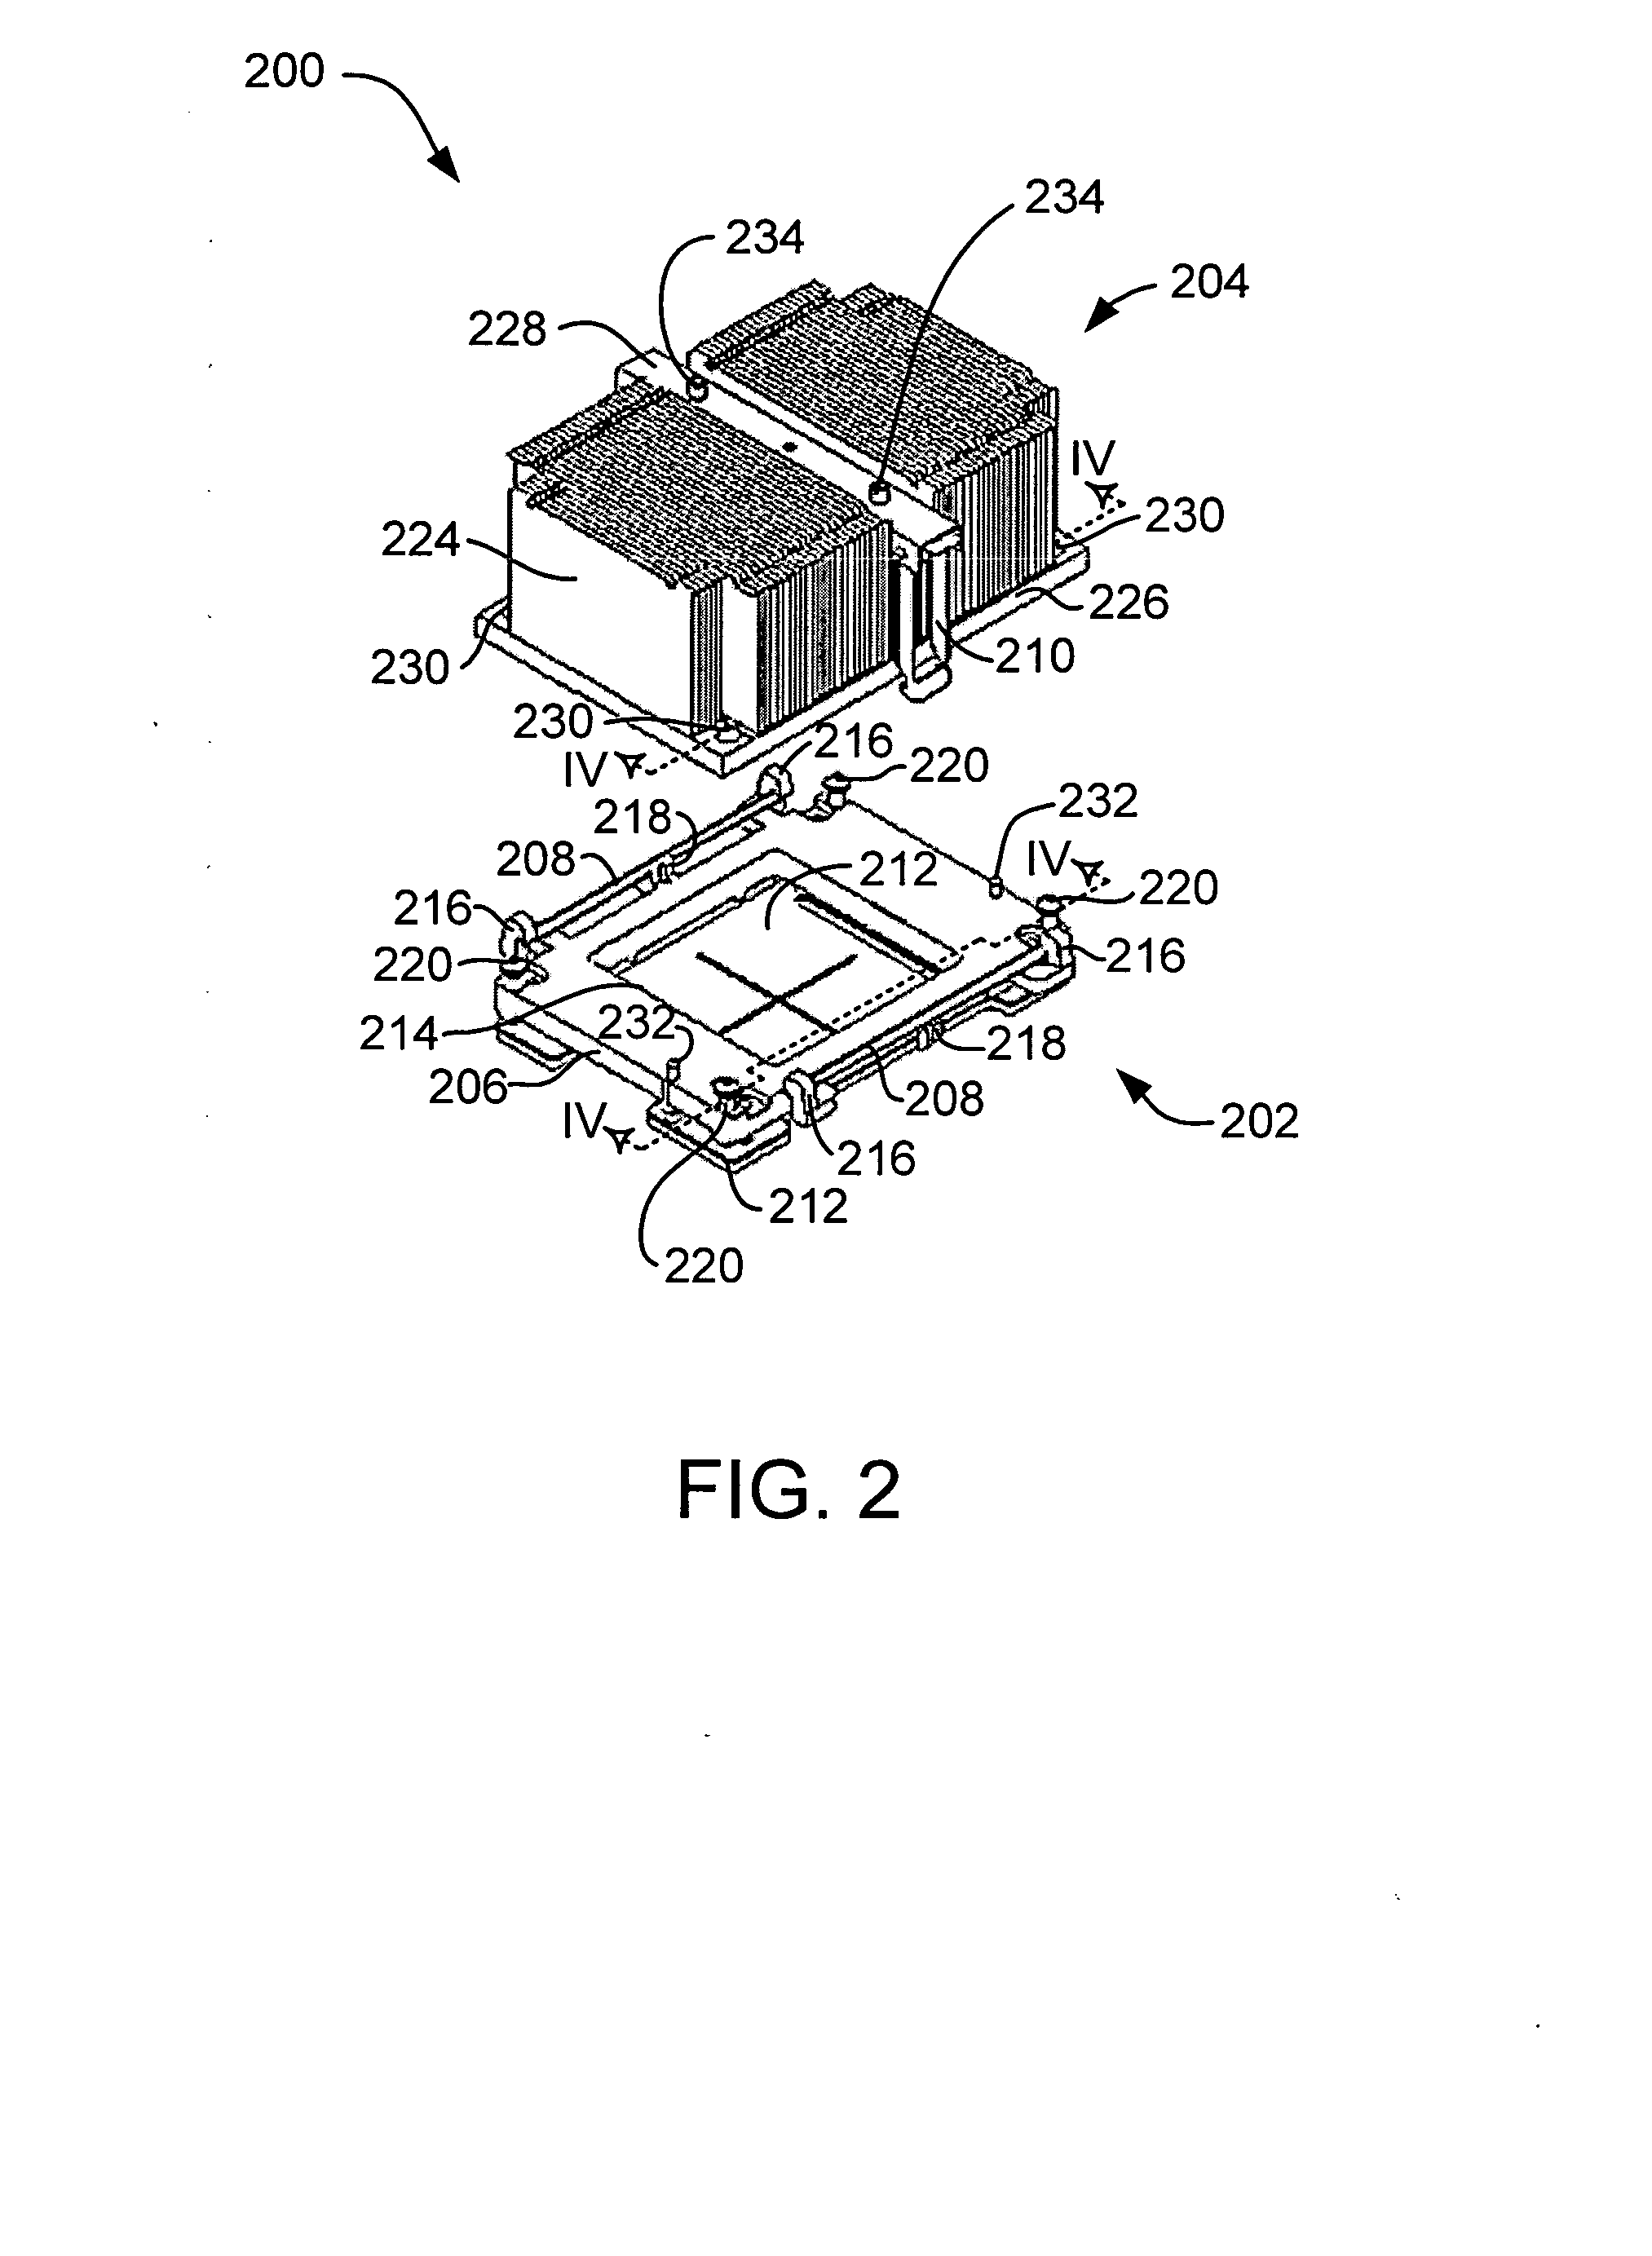 Method and apparatus for mounting a heat sink in thermal contact with an electronic component